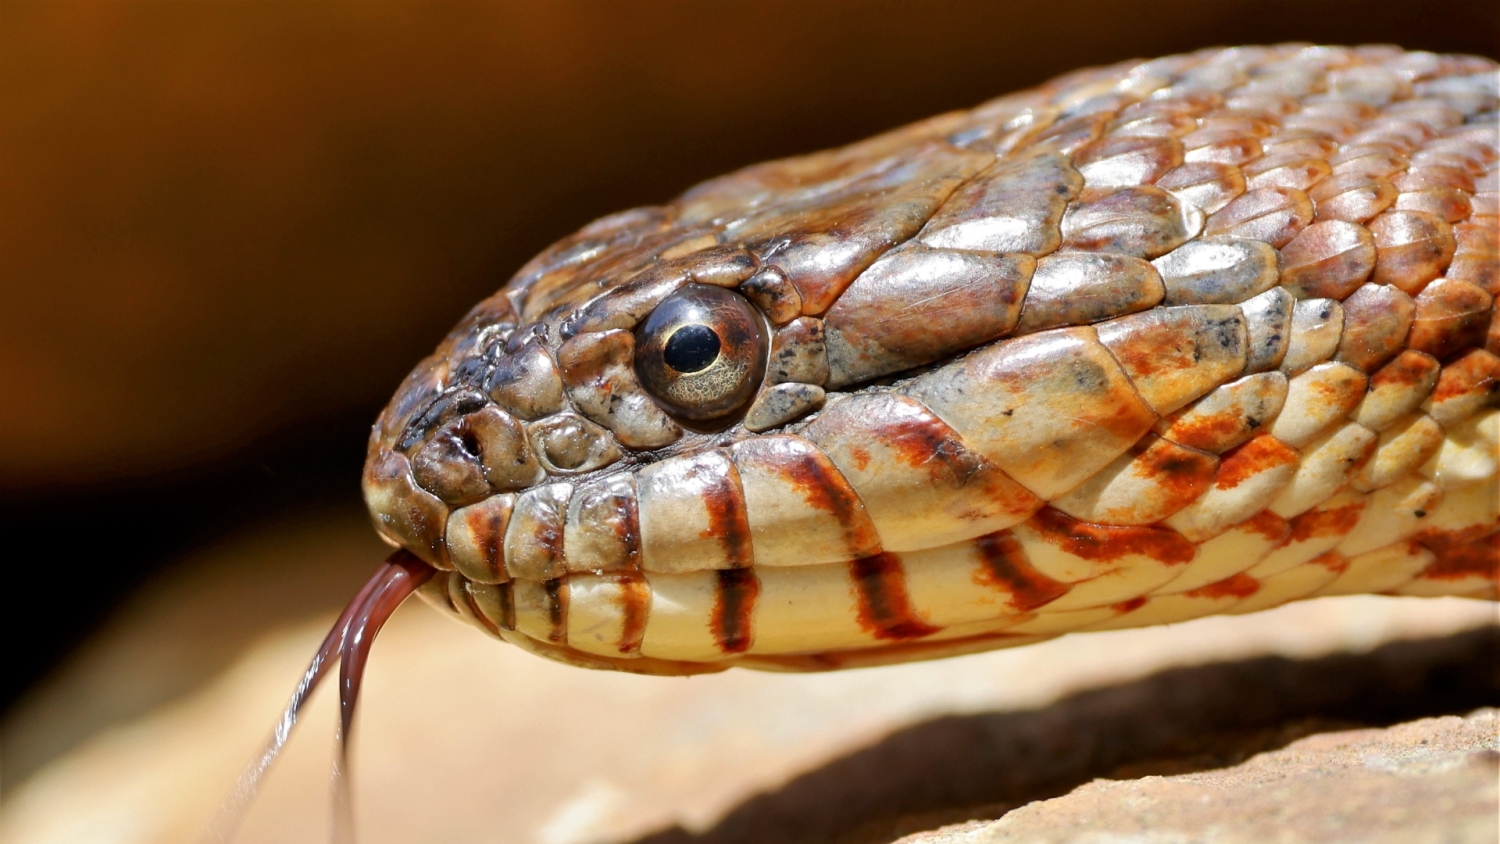 A Northern water snake